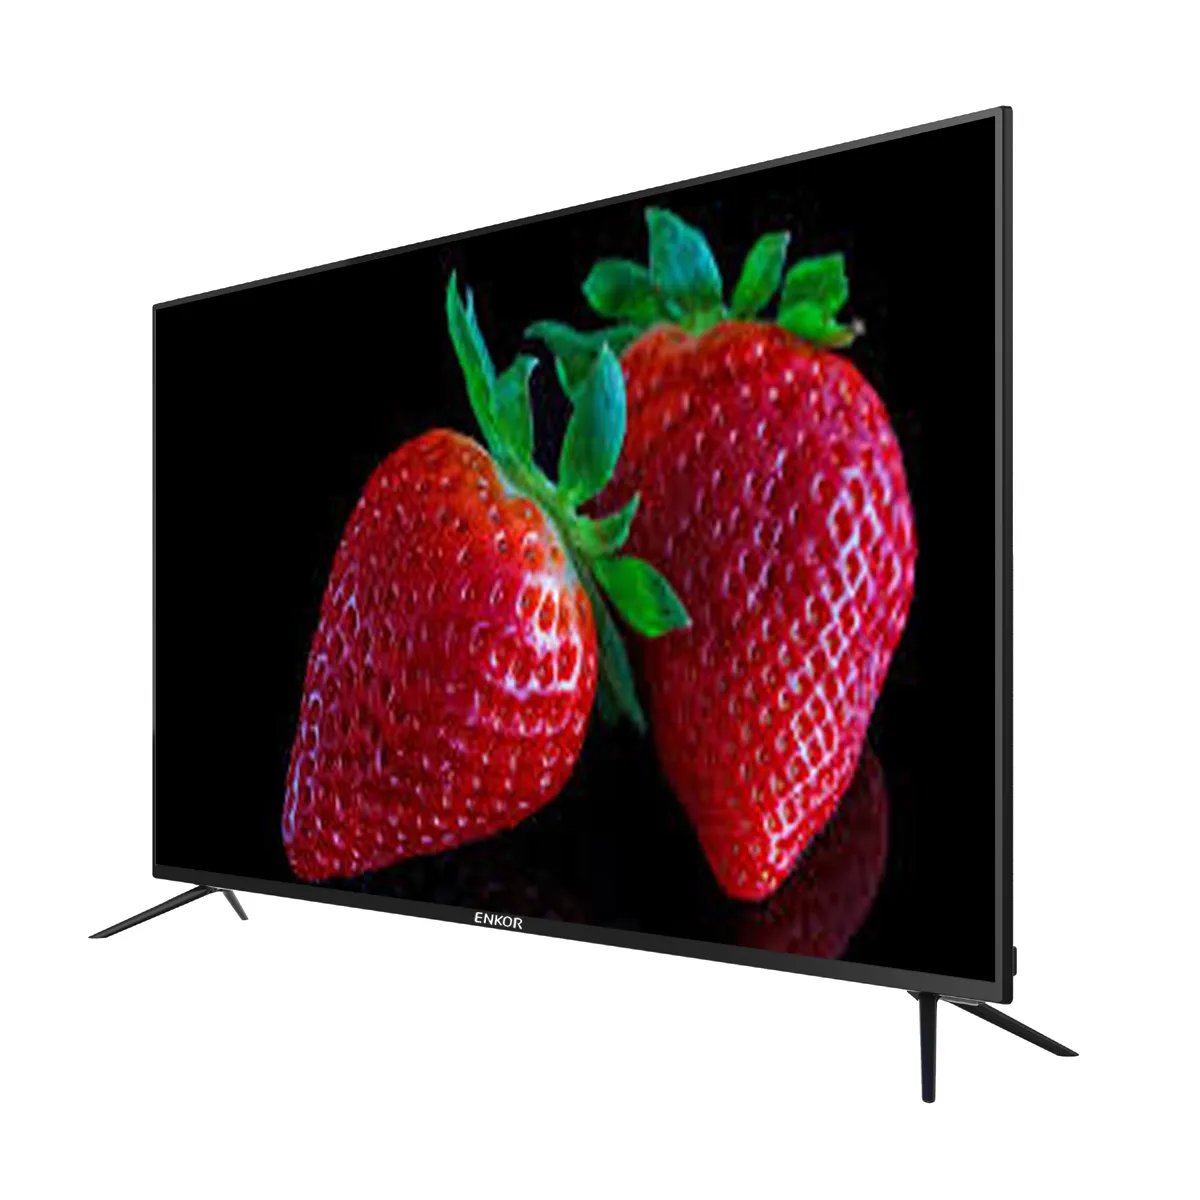 China Wholesale Lcd Led 4K 55 Wifi Ondersteuning Smart <span class=keywords><strong>Tv</strong></span> 55 65 Inch 4K Android Dvb-T2 S2 <span class=keywords><strong>Atsc</strong></span> isdb <span class=keywords><strong>Digitale</strong></span> <span class=keywords><strong>Tv</strong></span> Antenne <span class=keywords><strong>Tv</strong></span>